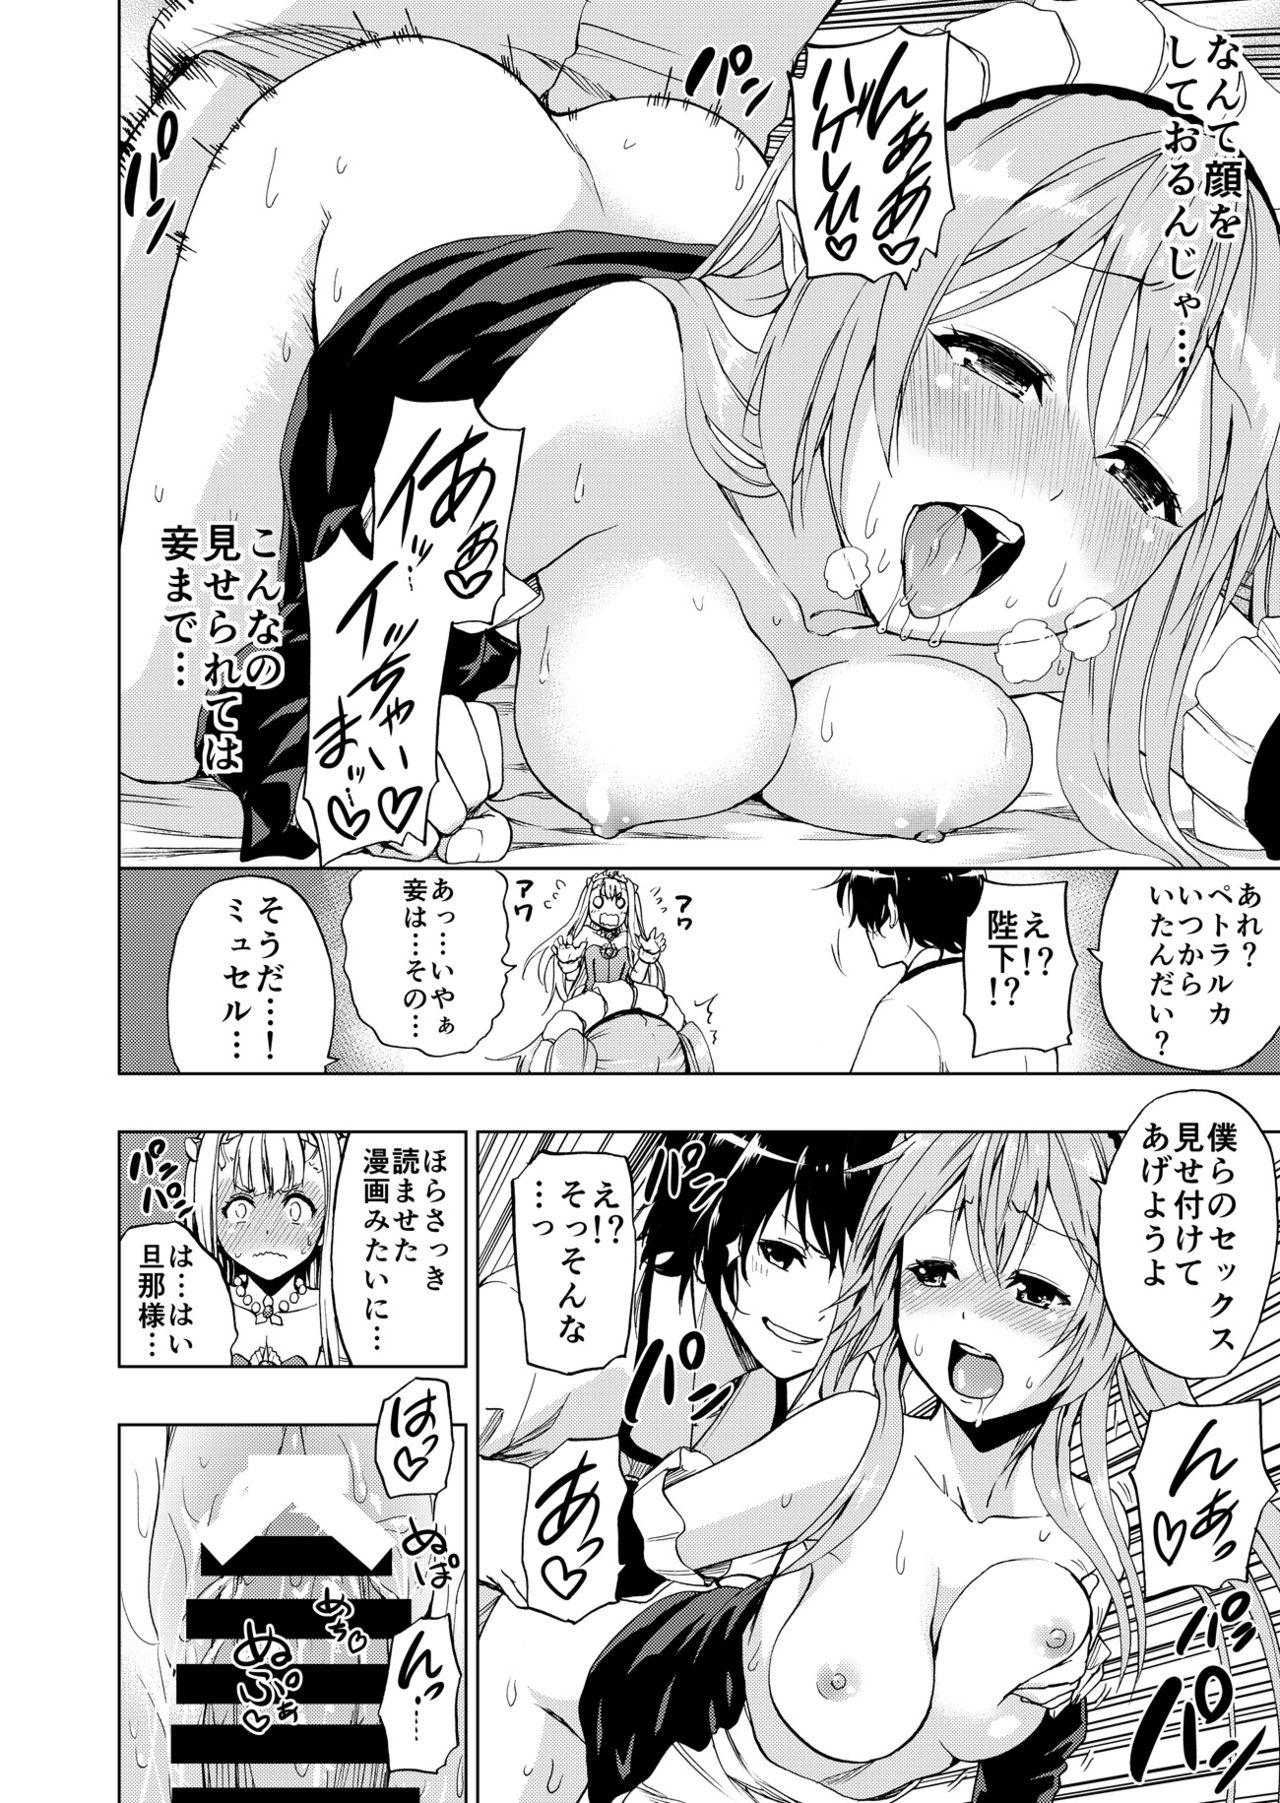 Emo Outbreak Harem - Outbreak company Hugecock - Page 11